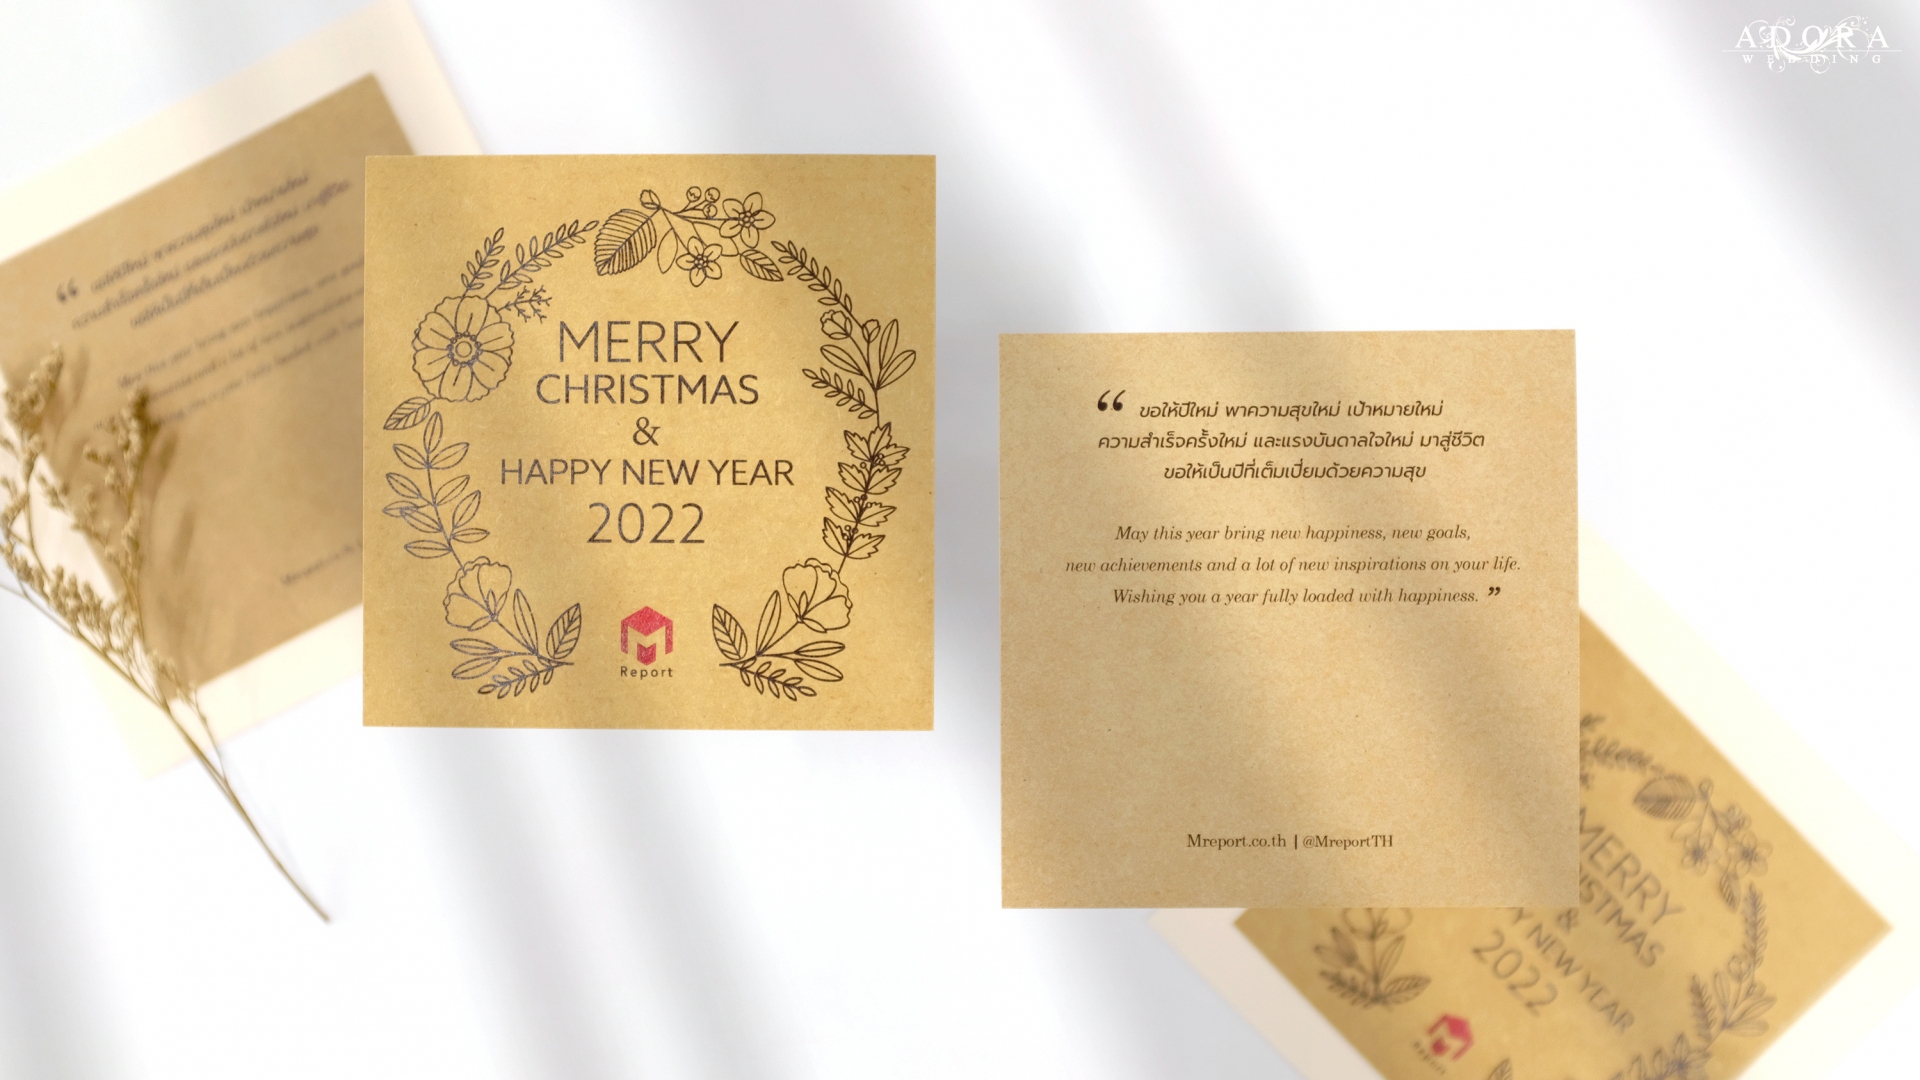 Portfolio Merry X Mas & Happy New Year 2022 Card on Craft Paper in Square Shape